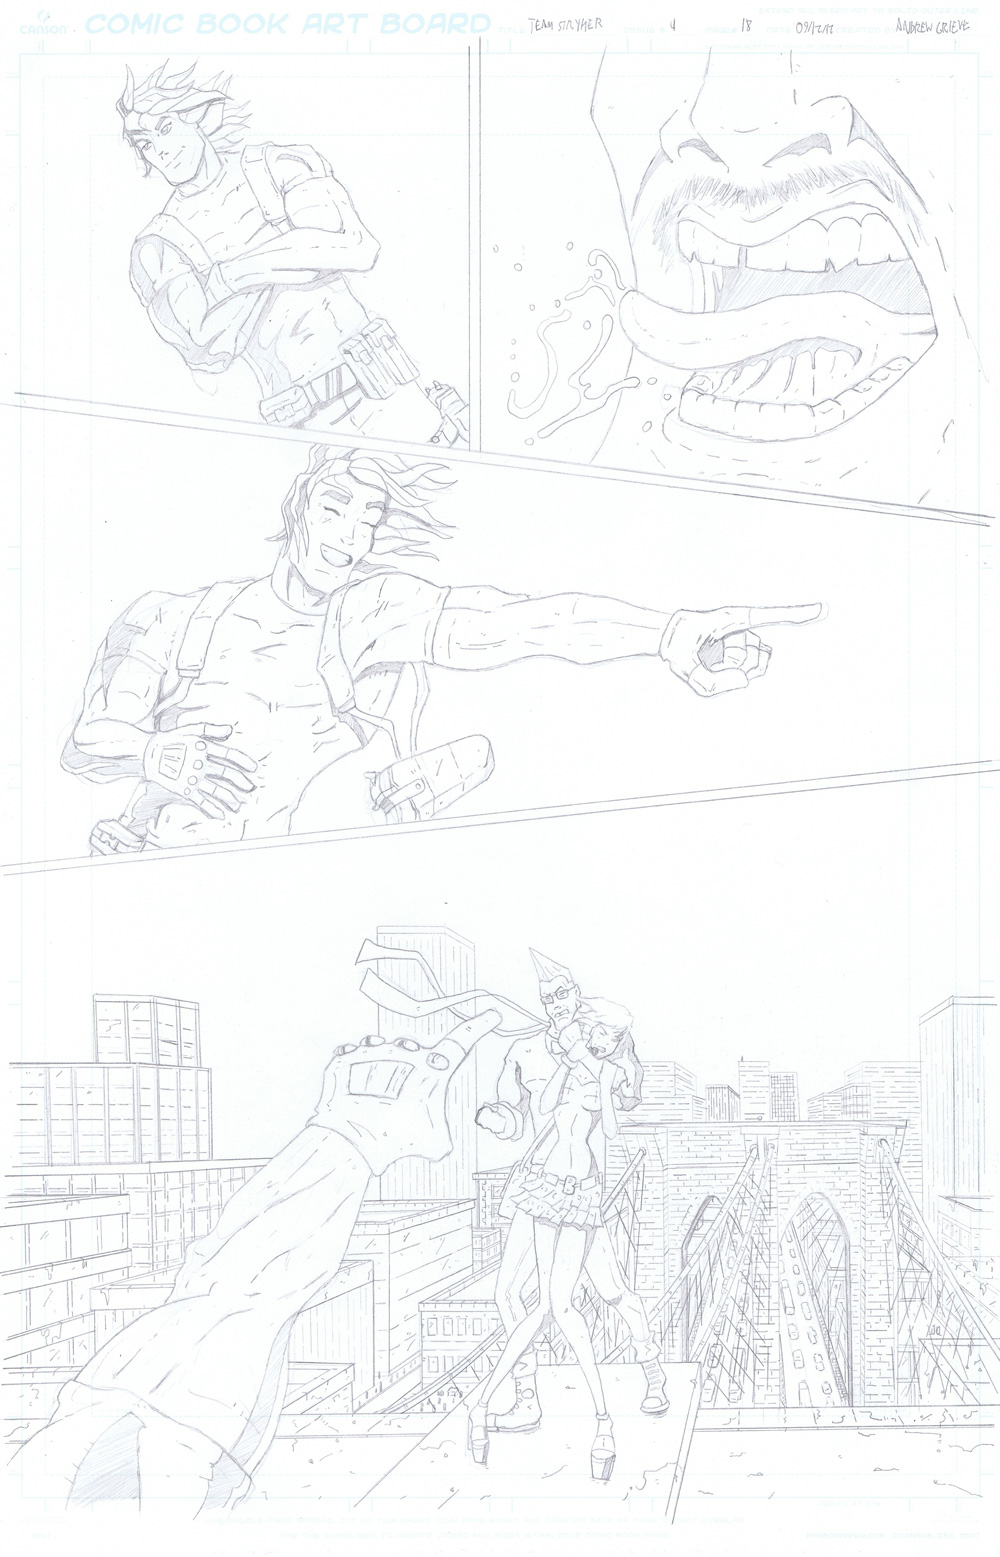 MISSION 004: PAGE 18 PENCIL